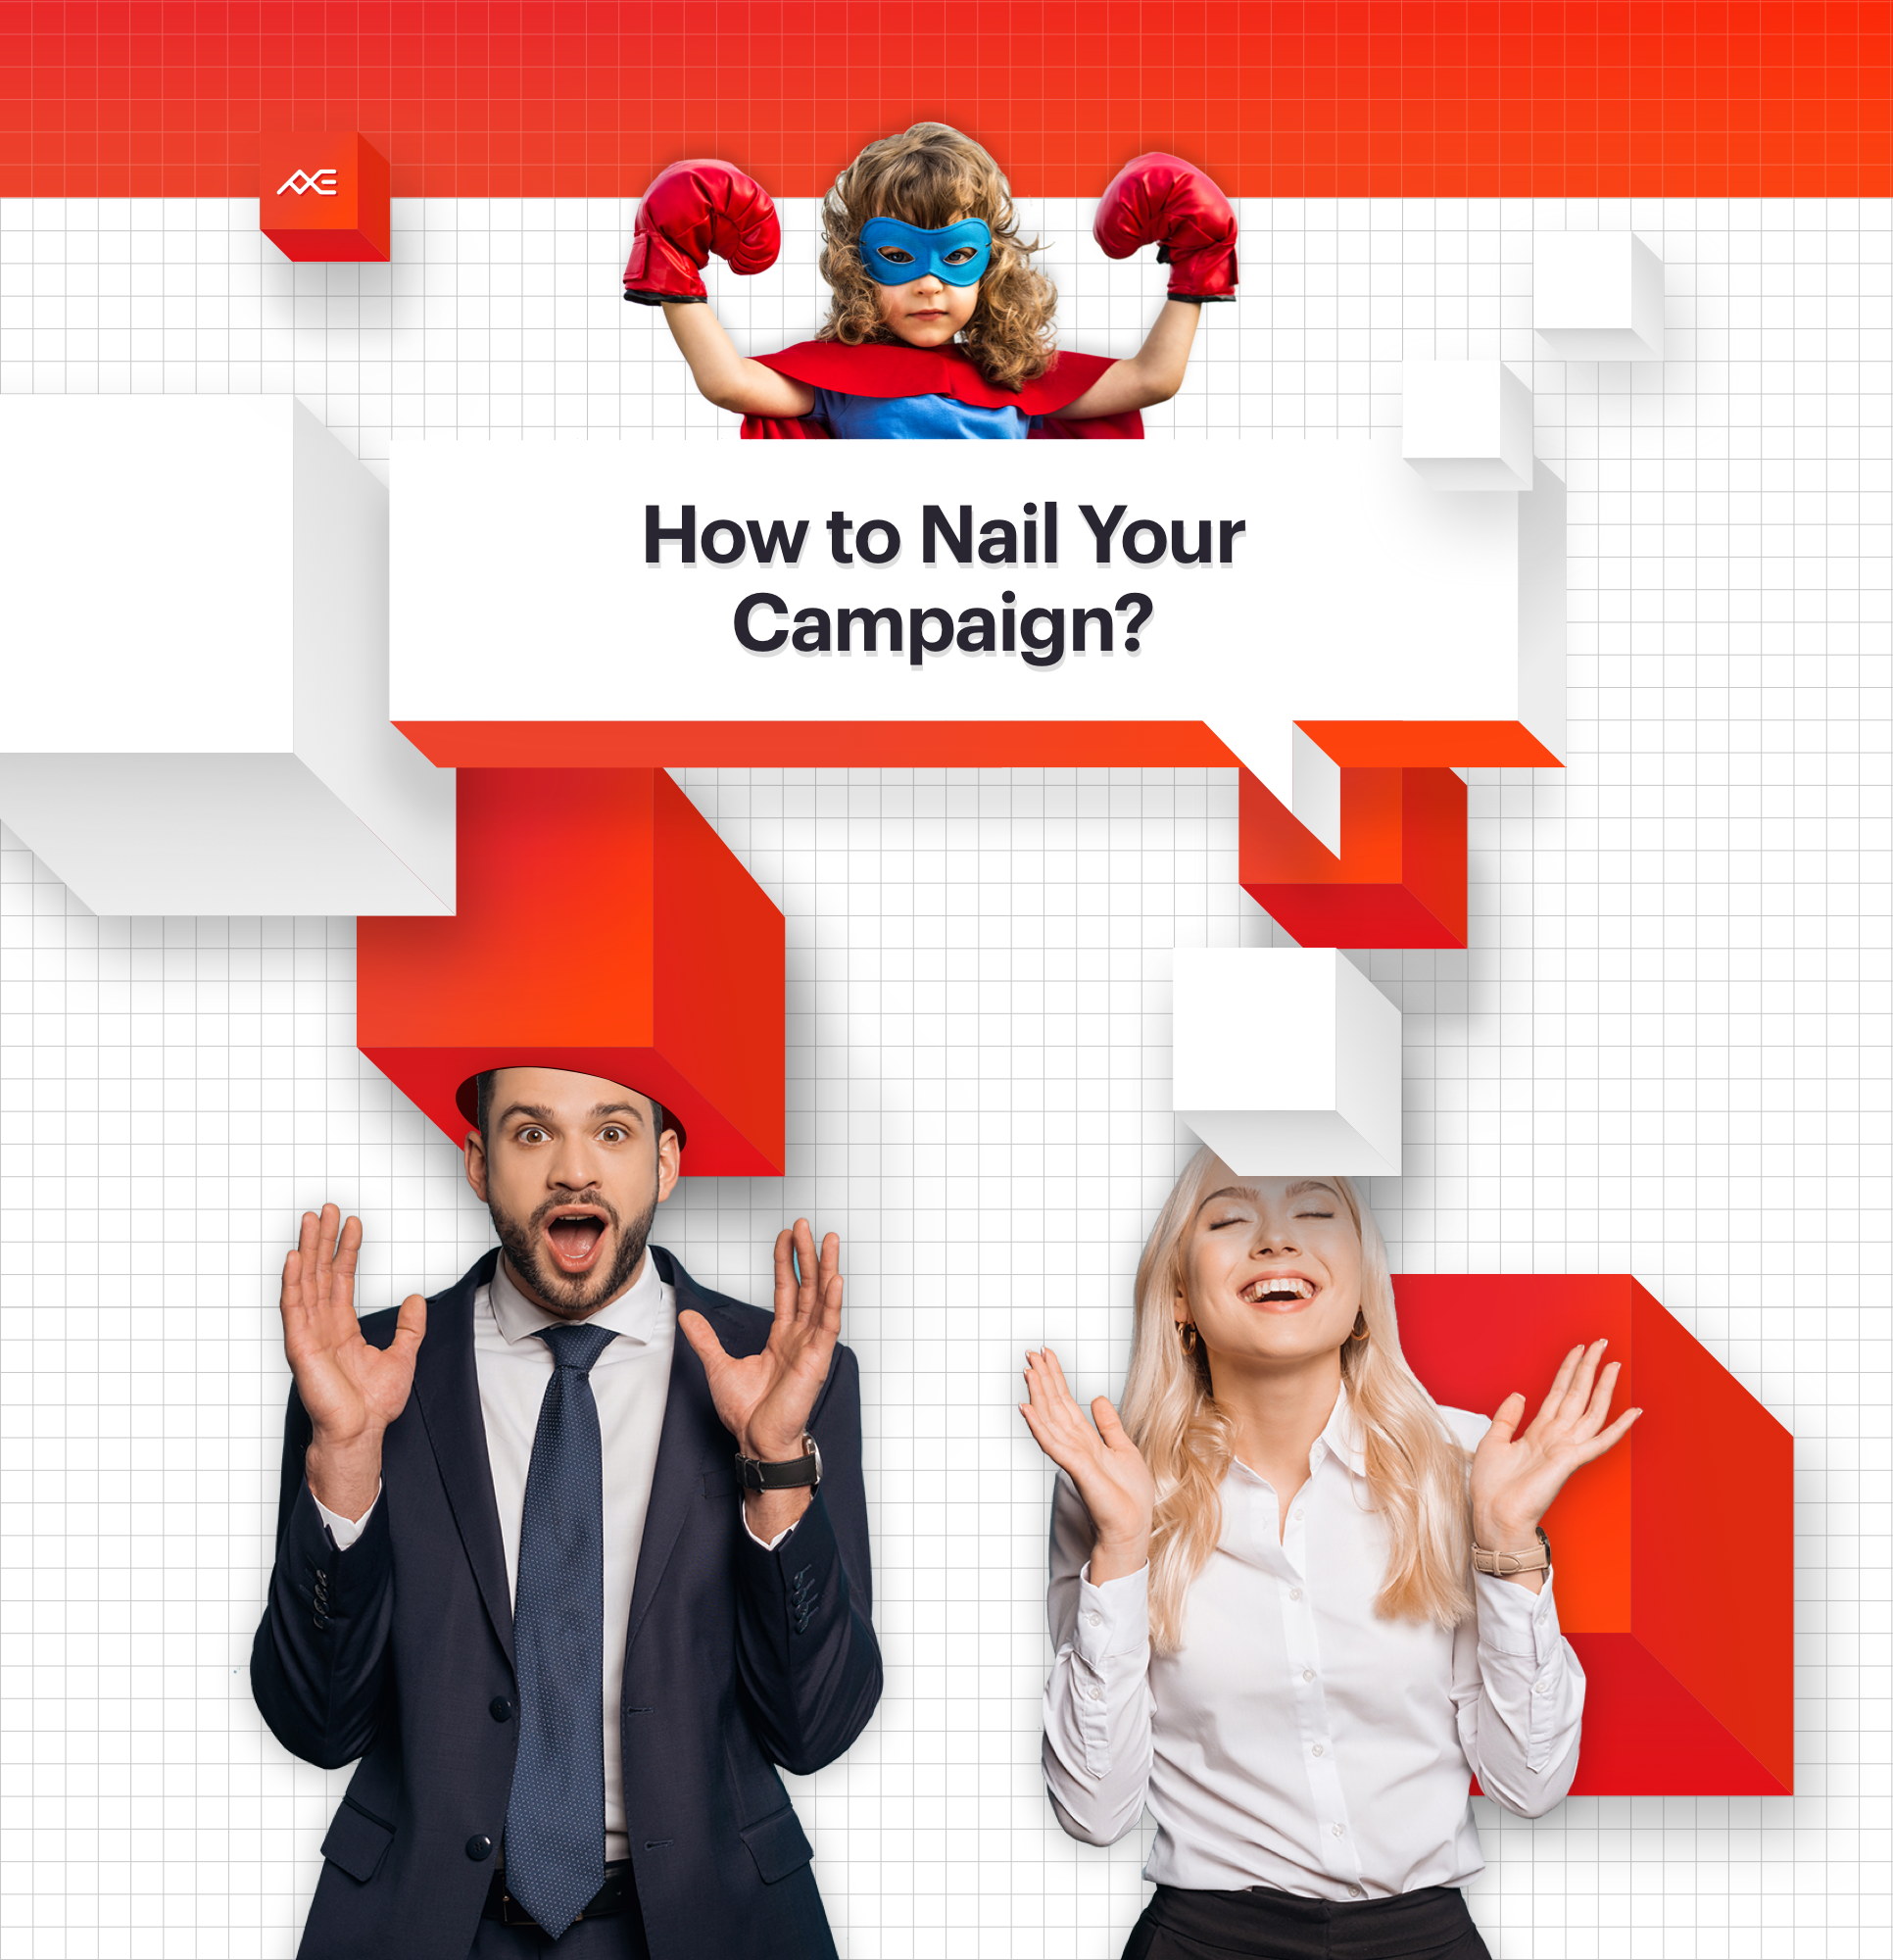 How to Nail Your Campaign